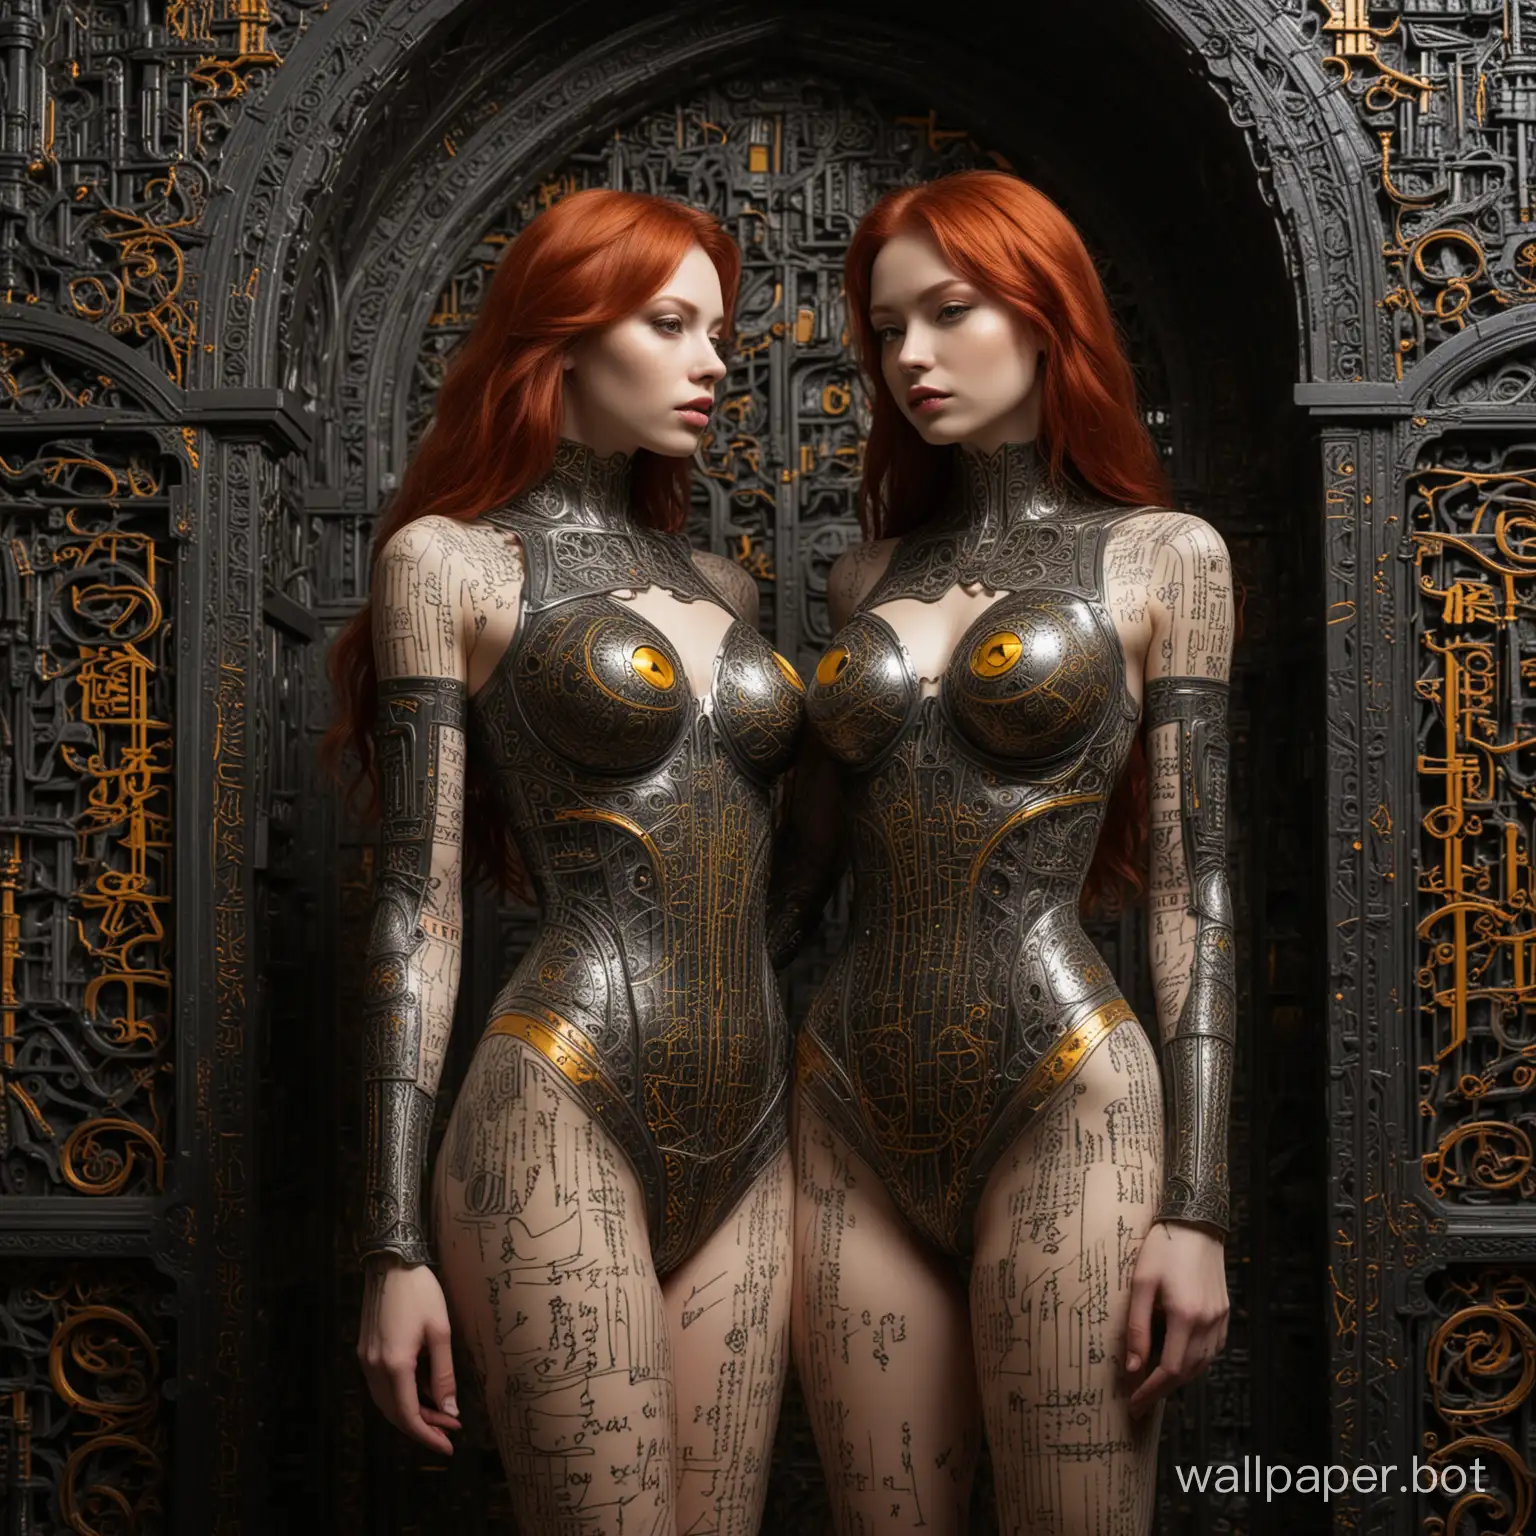 Redhaired-Cyborg-Girls-in-Ornate-Castle-Hall